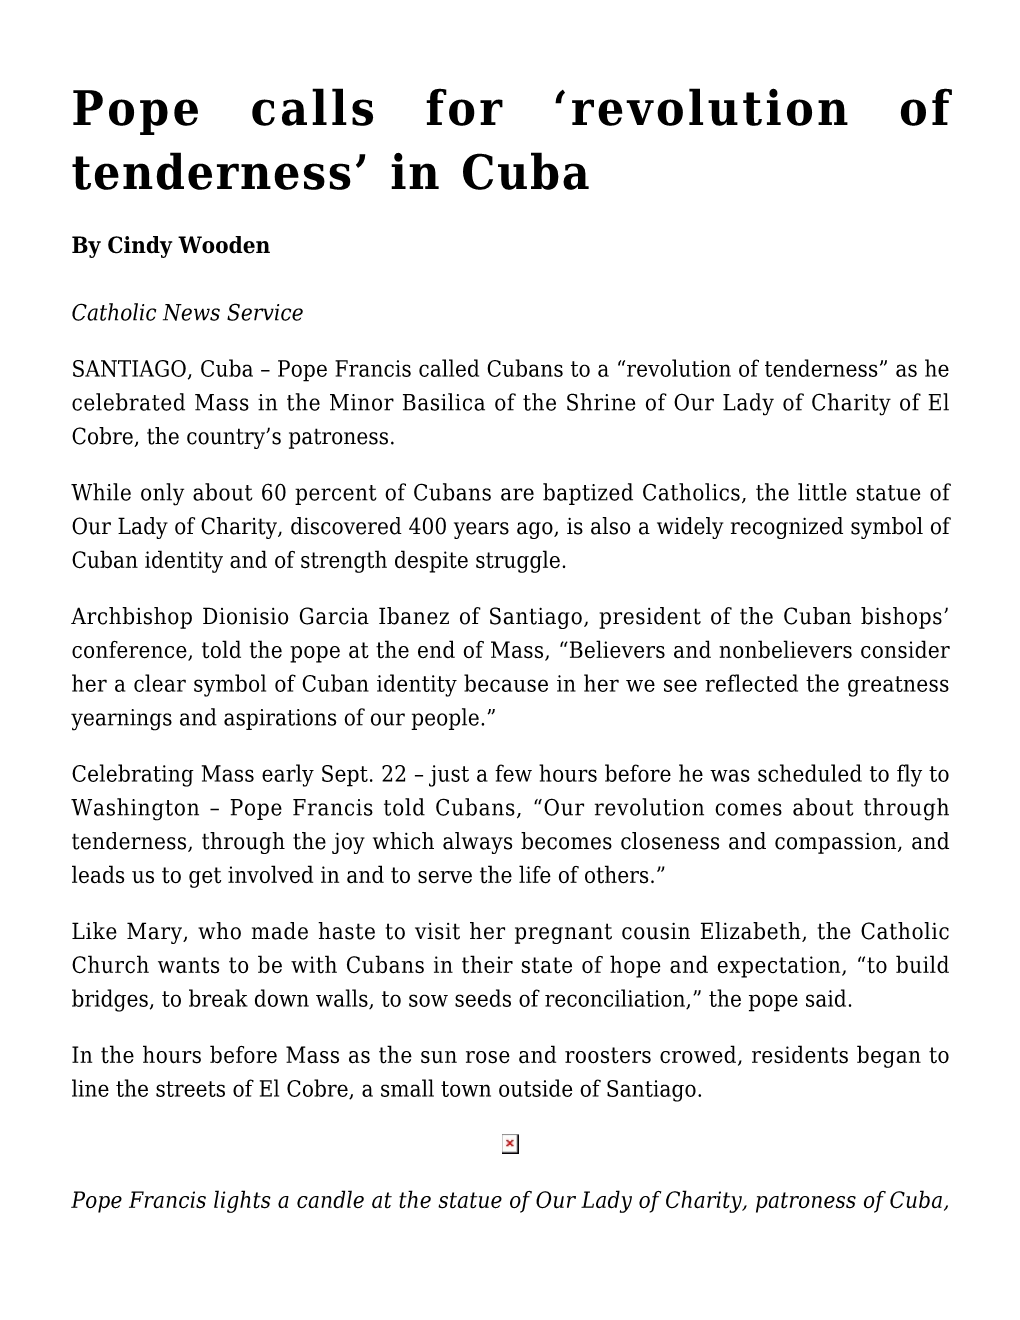 Pope Calls for 'Revolution of Tenderness' in Cuba